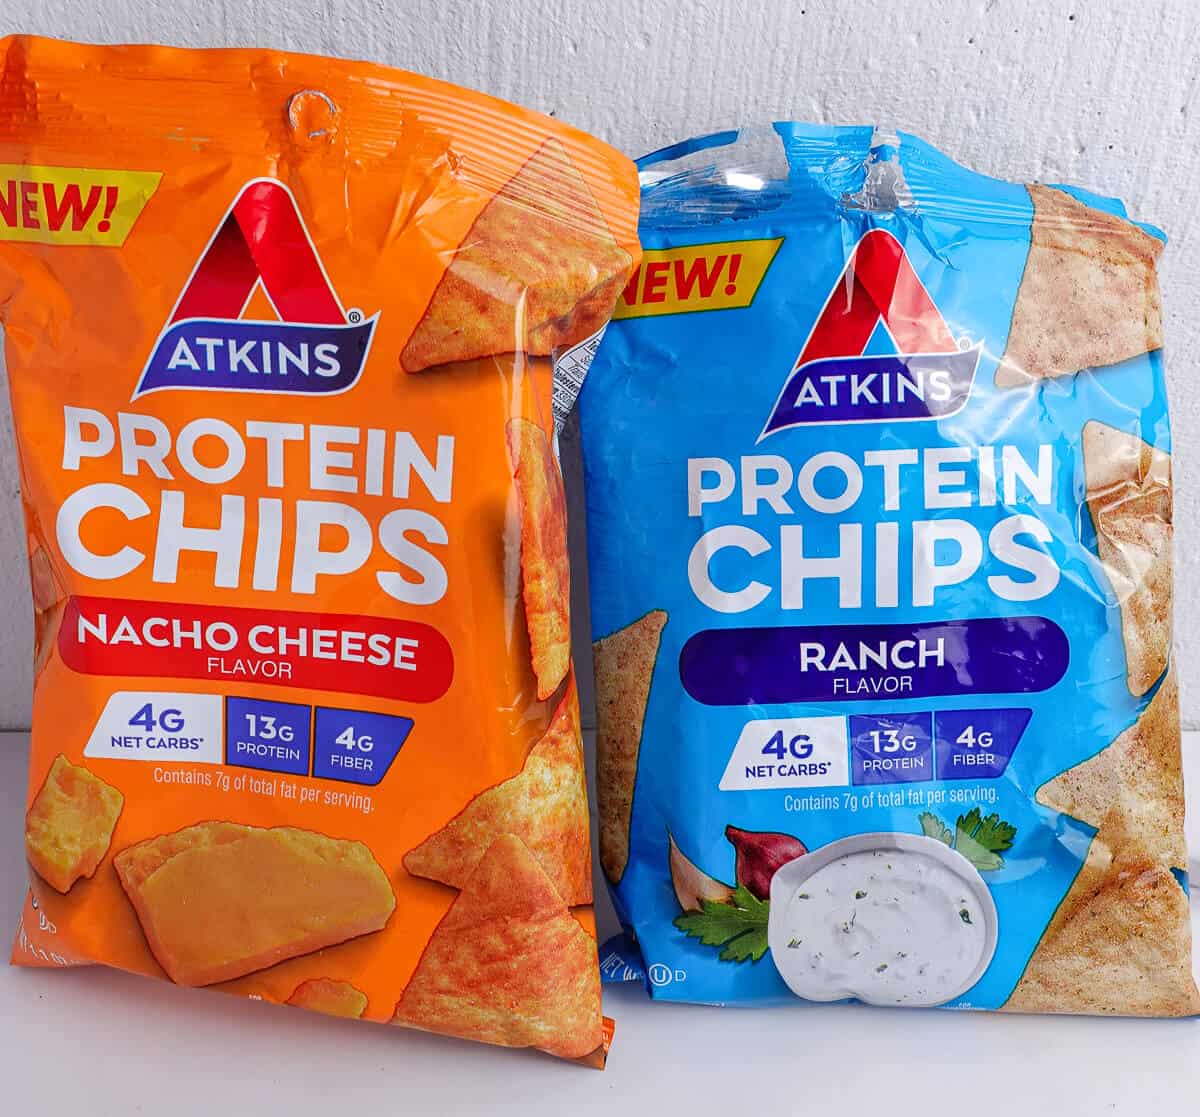 Atkins Protein Chips